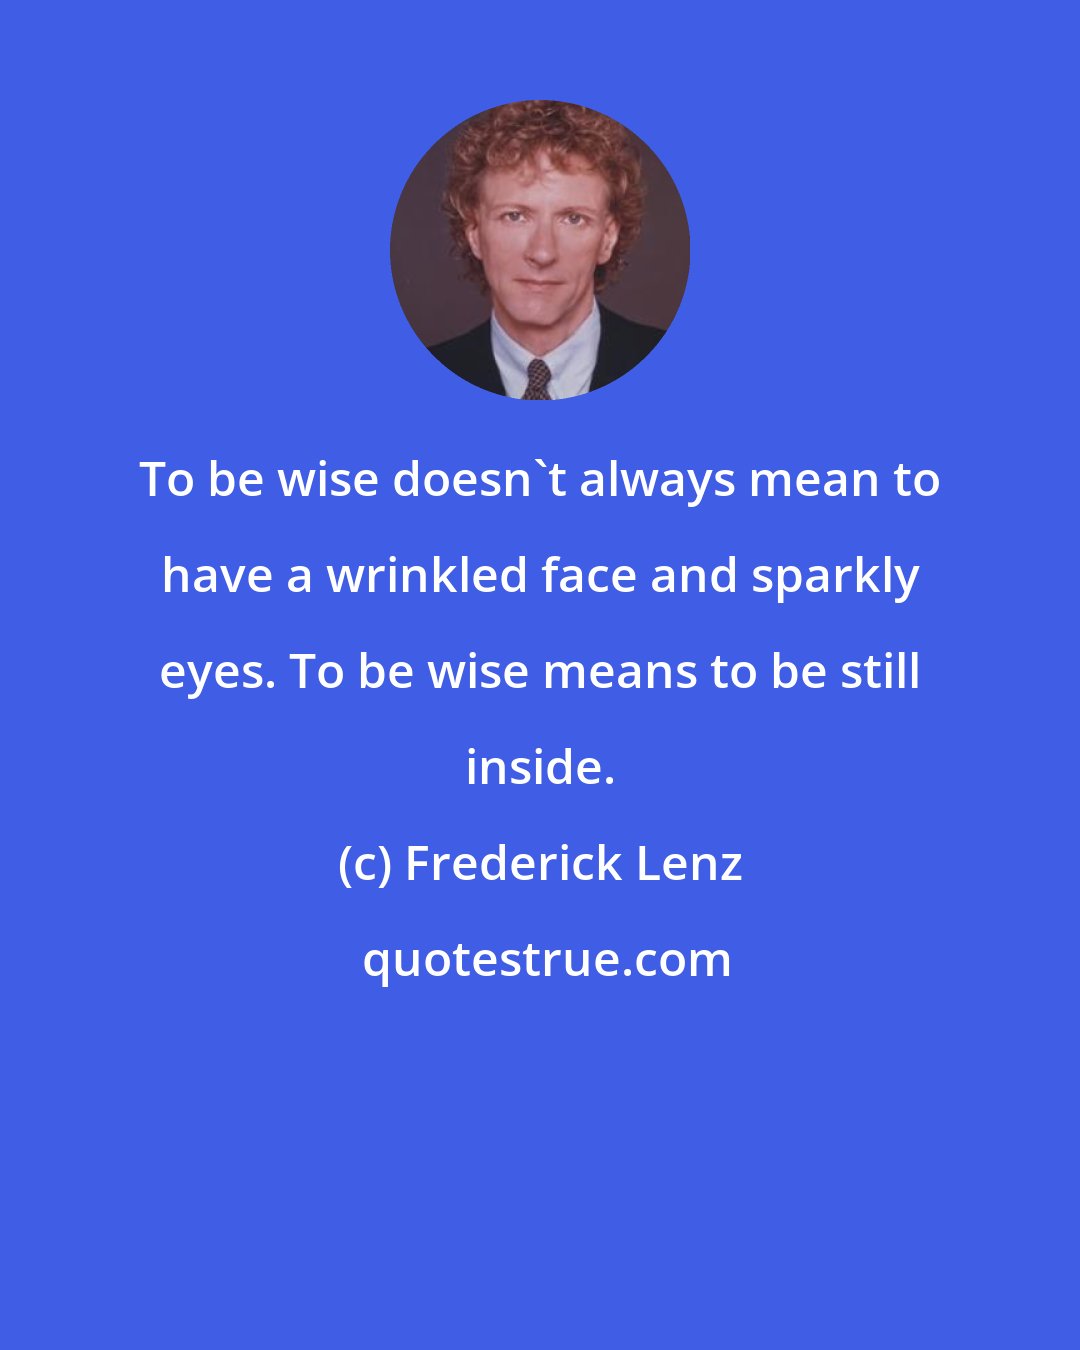 Frederick Lenz: To be wise doesn't always mean to have a wrinkled face and sparkly eyes. To be wise means to be still inside.